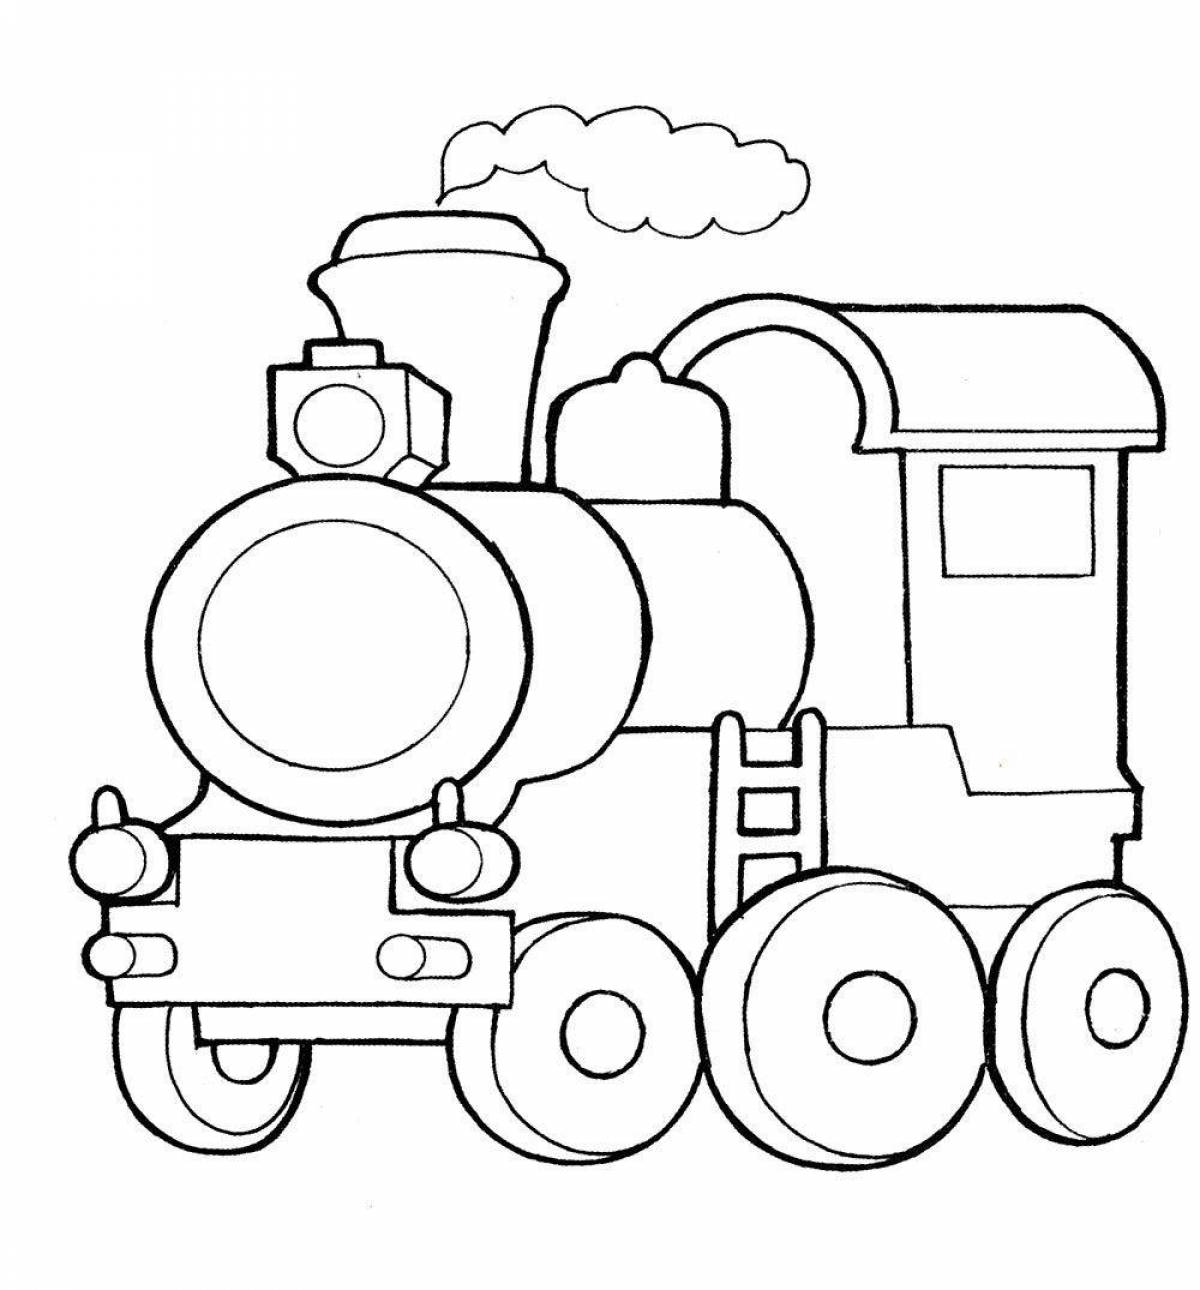 Unique transport coloring book for 3-4 year olds